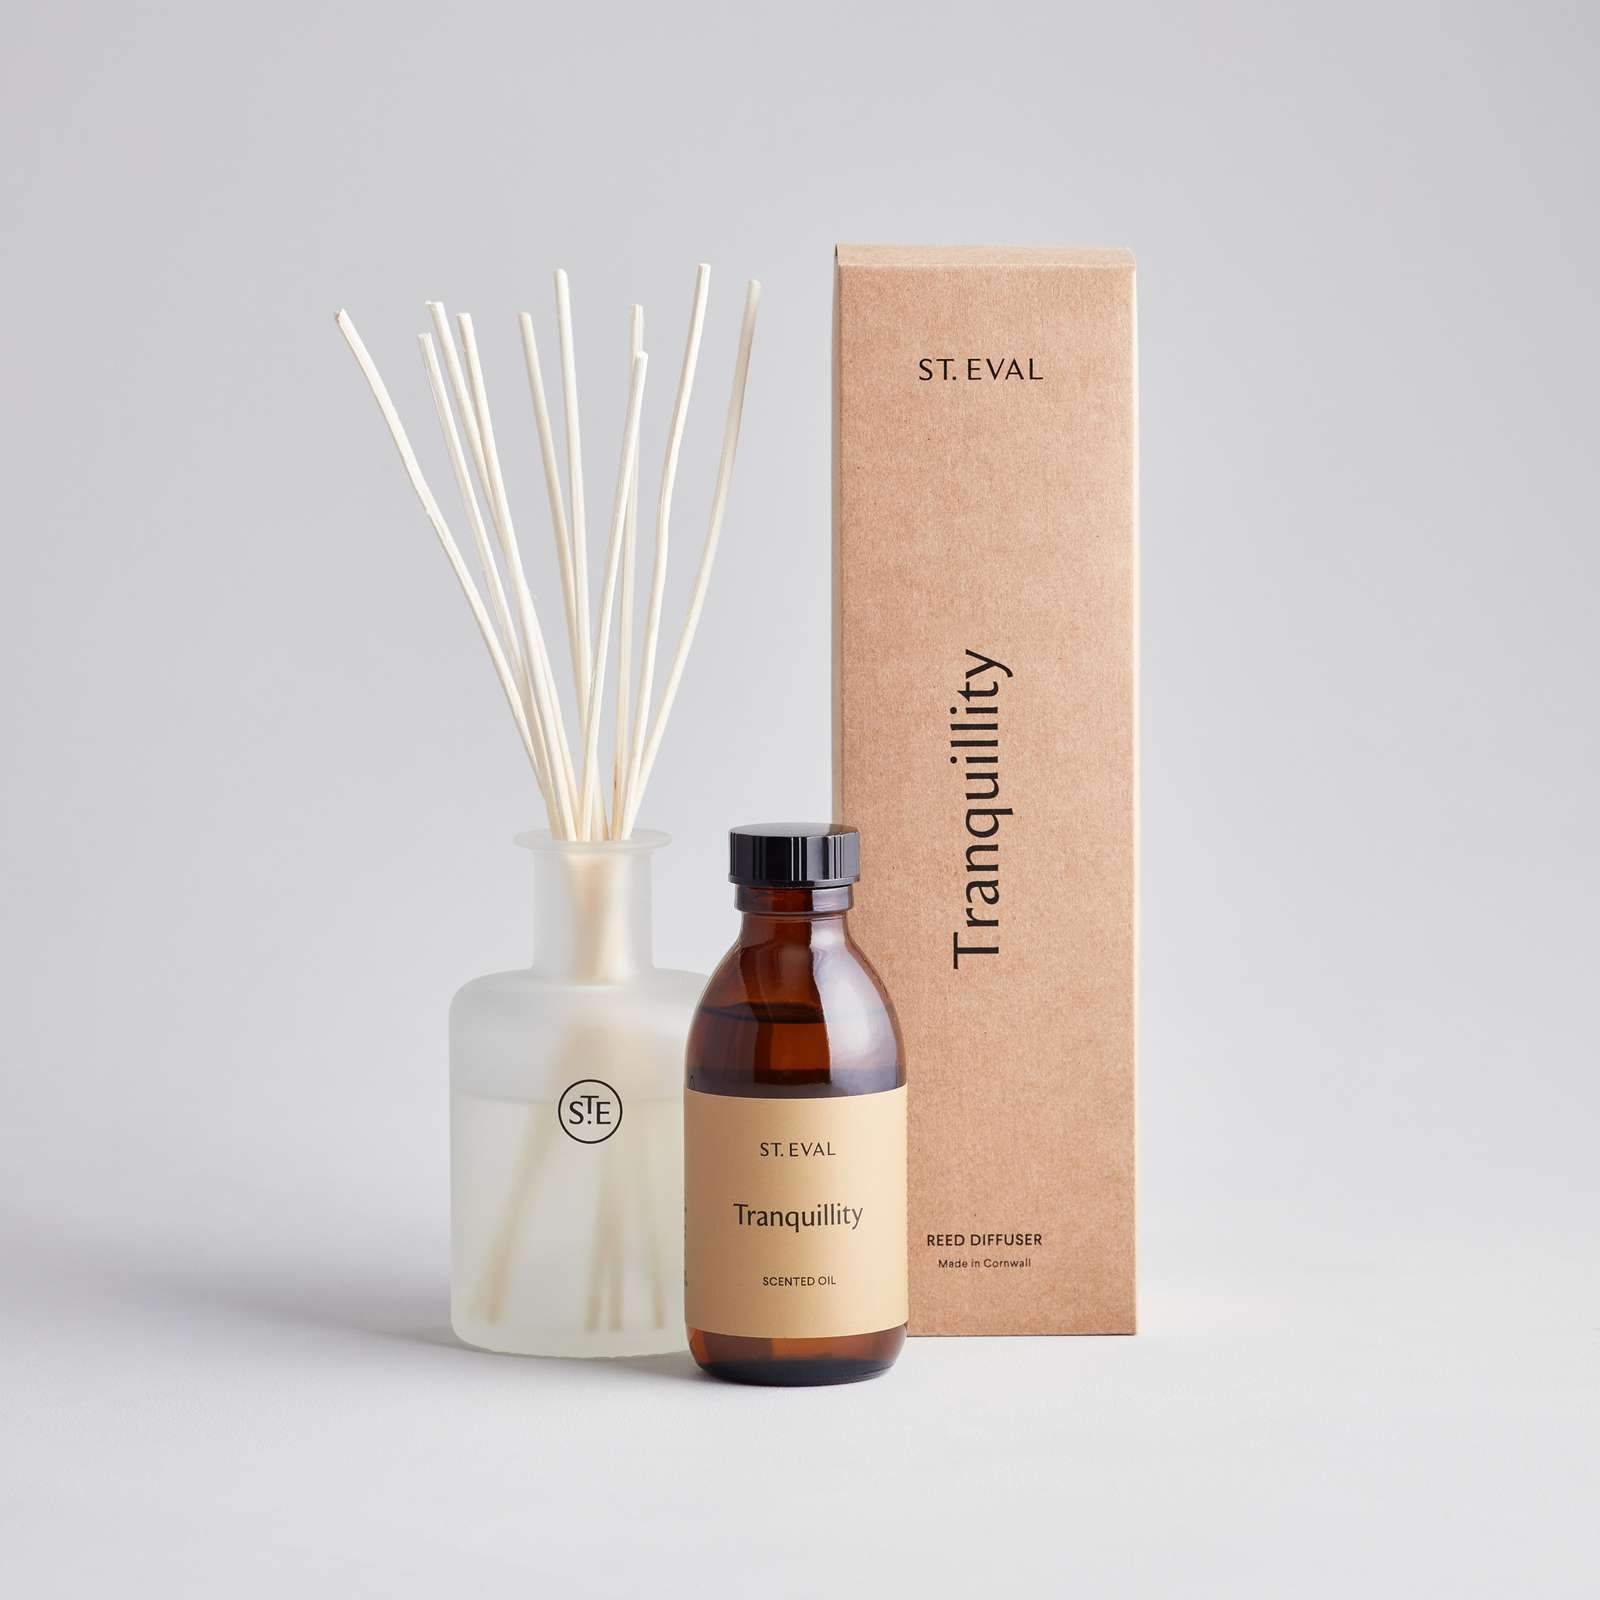 Orange and Cinnamon Reed Diffuser | St. Eval – St. Eval Candle Company